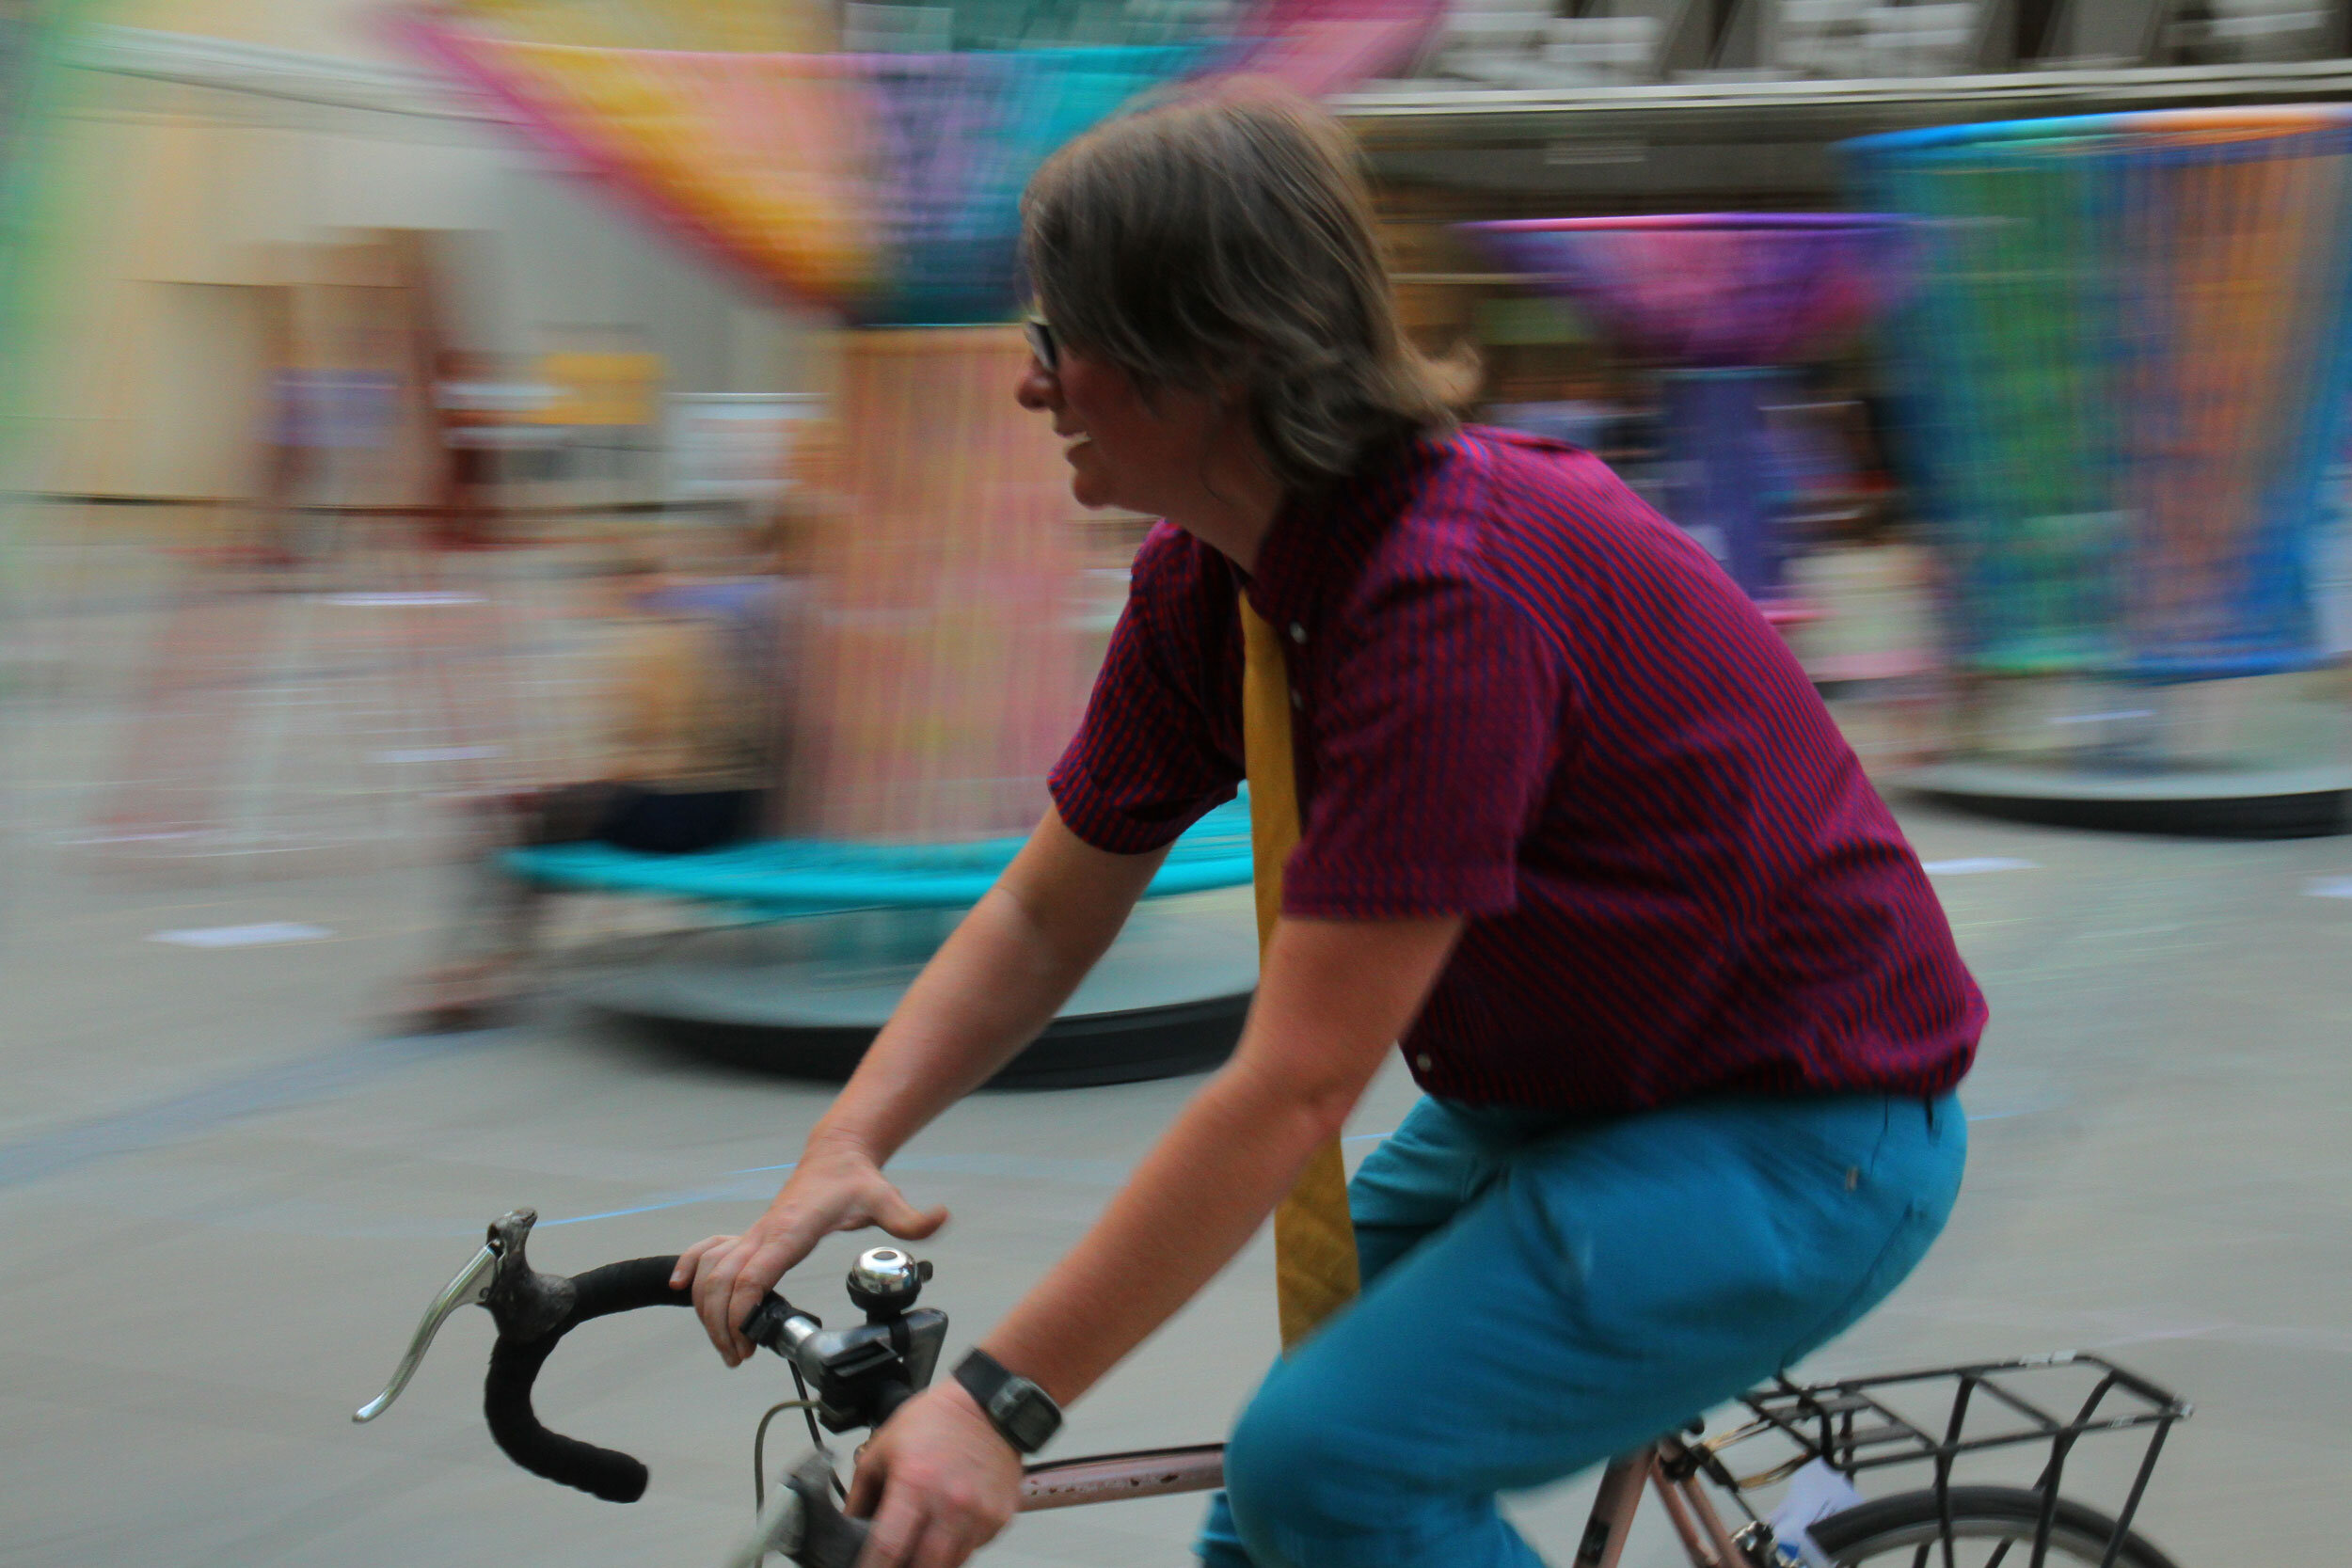 A performer on a bicycle moving past the camera.